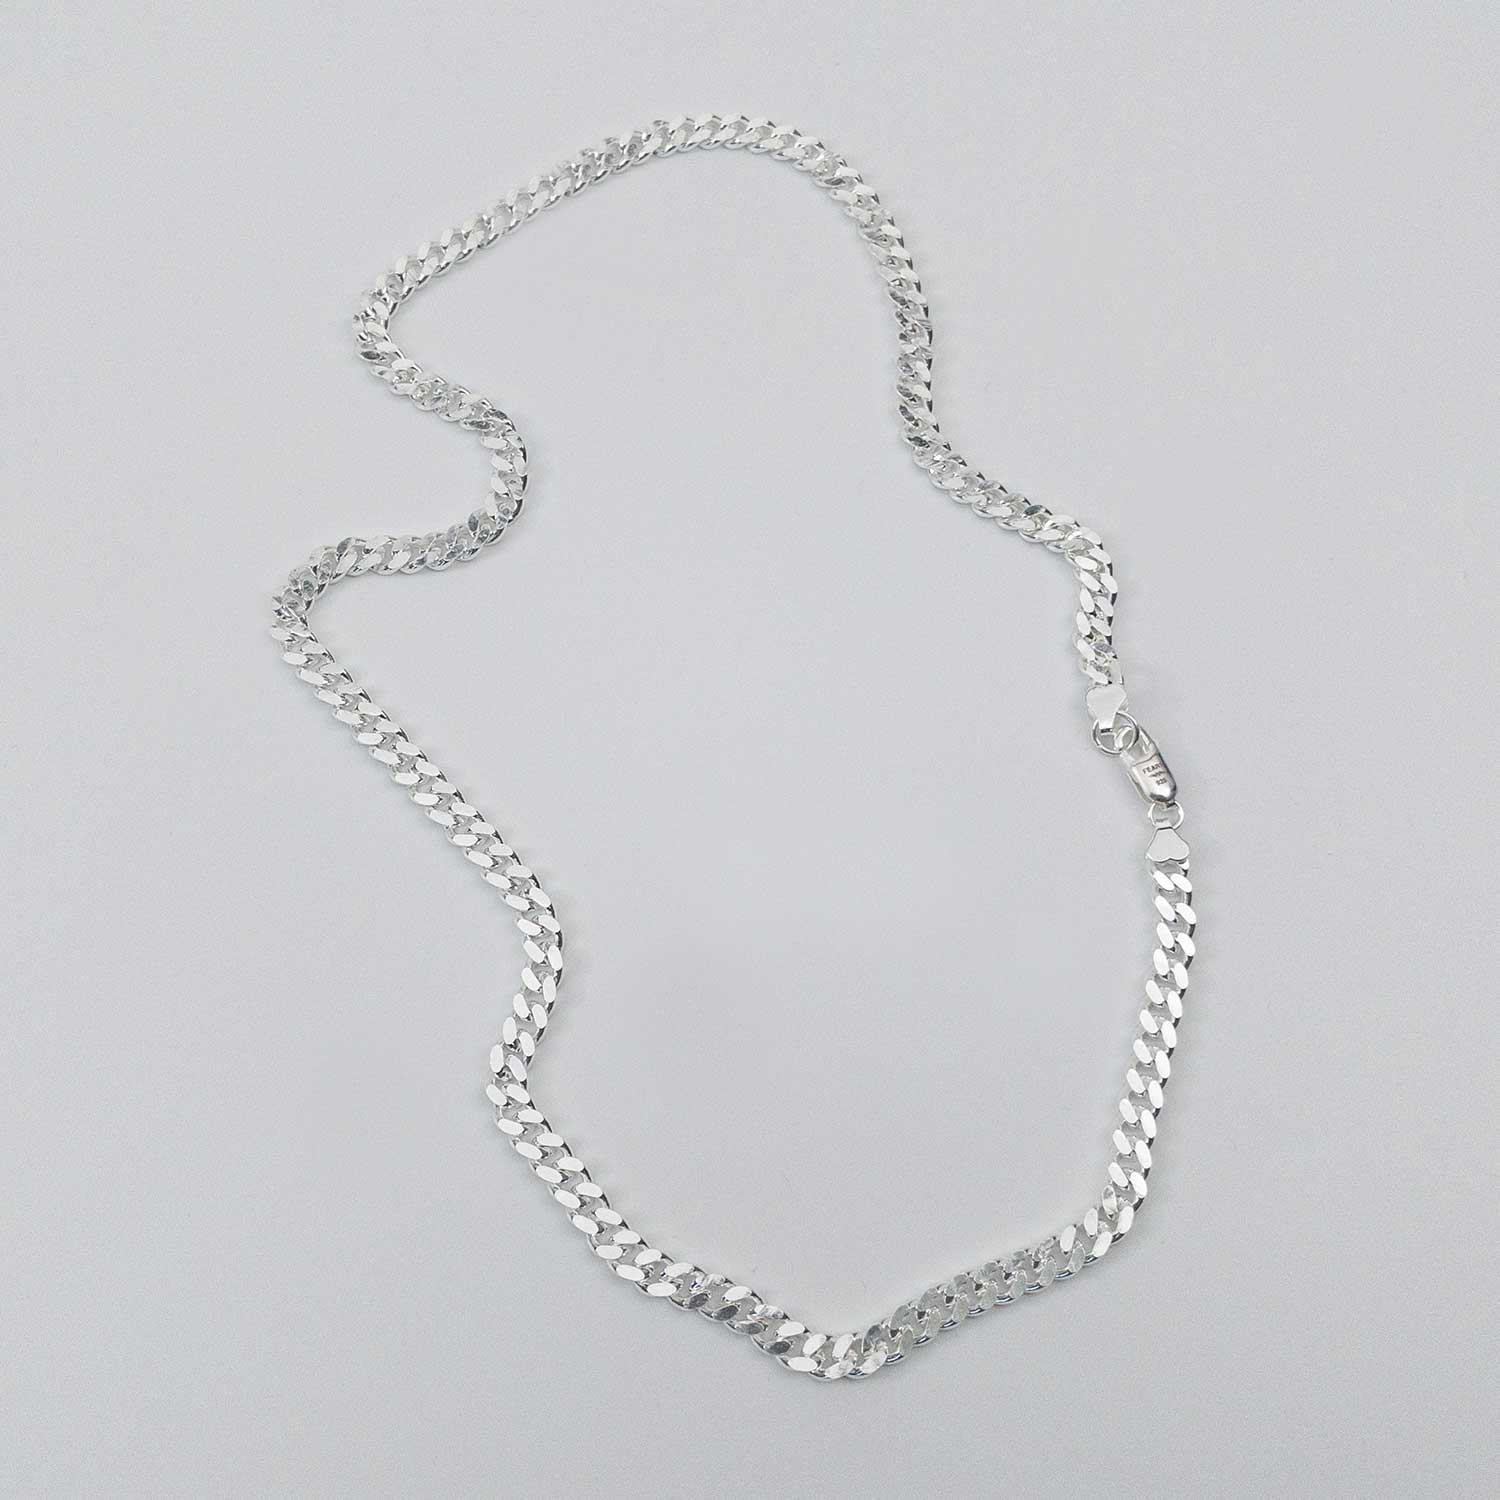 Sterling Silver 5mm Cuban Chain made by FEARS 925 - Personal Fears